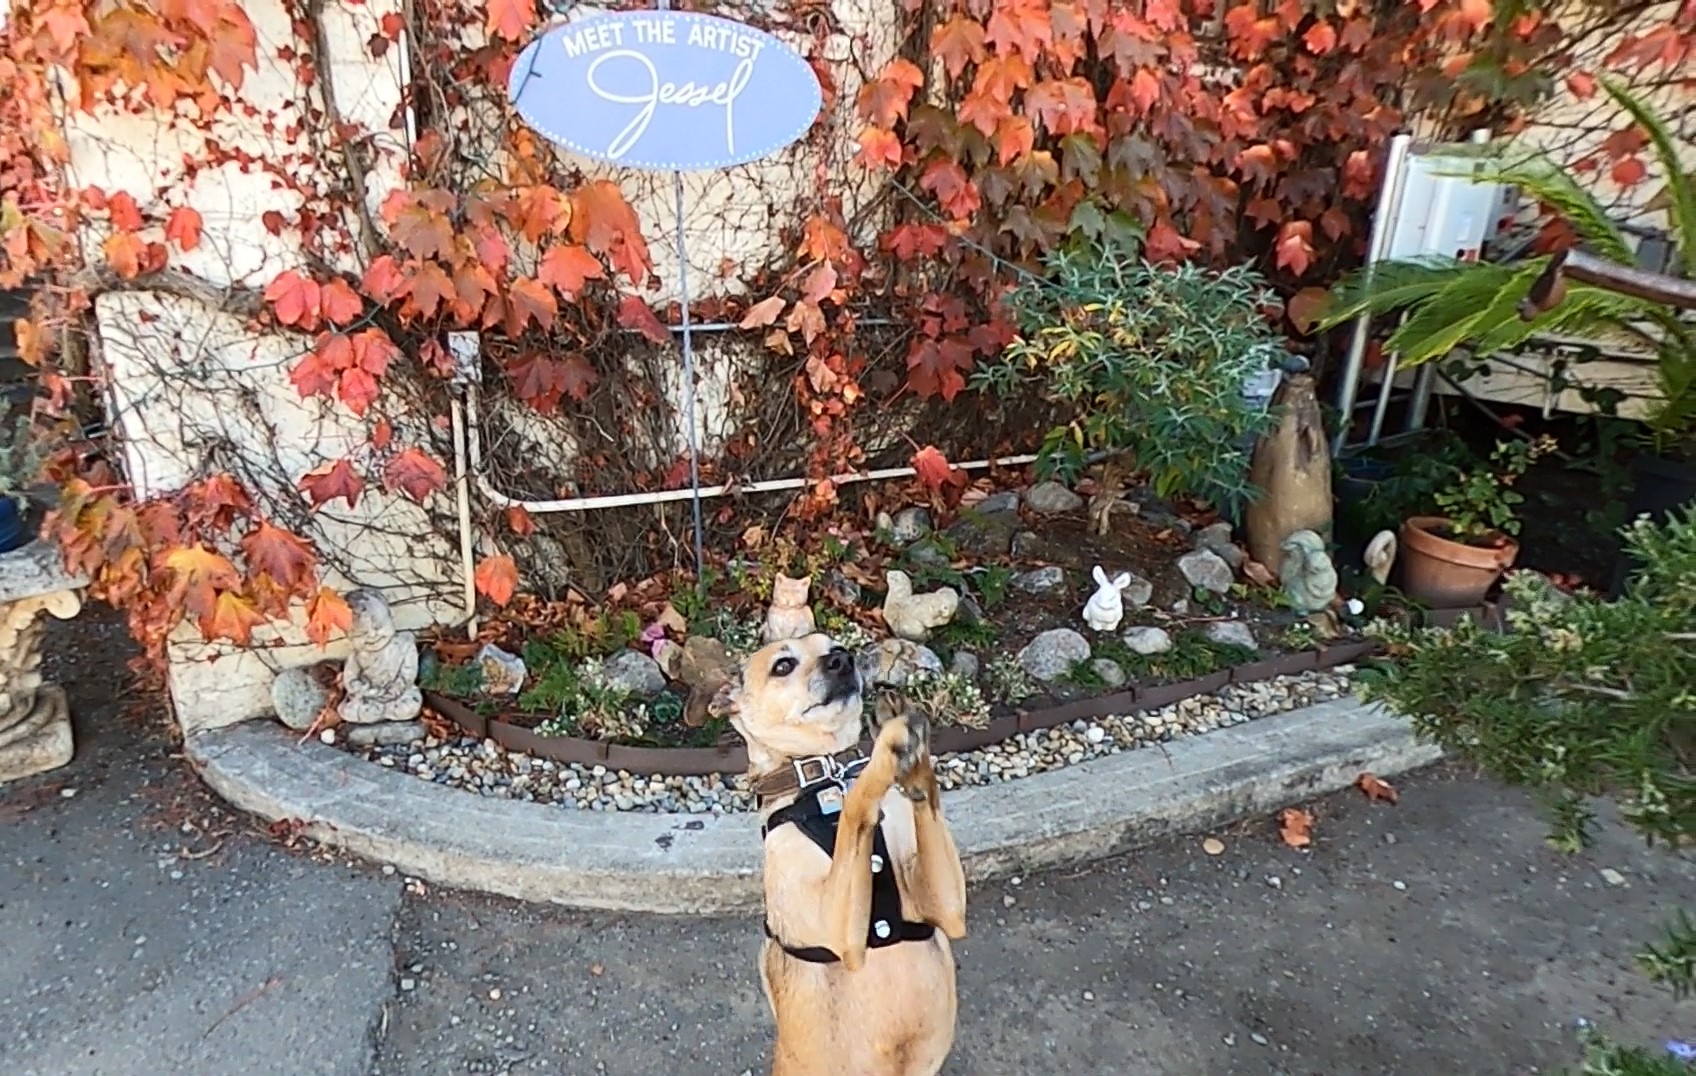 JESSEL GALLERY: Pet-friendly Napa Valley Video Review